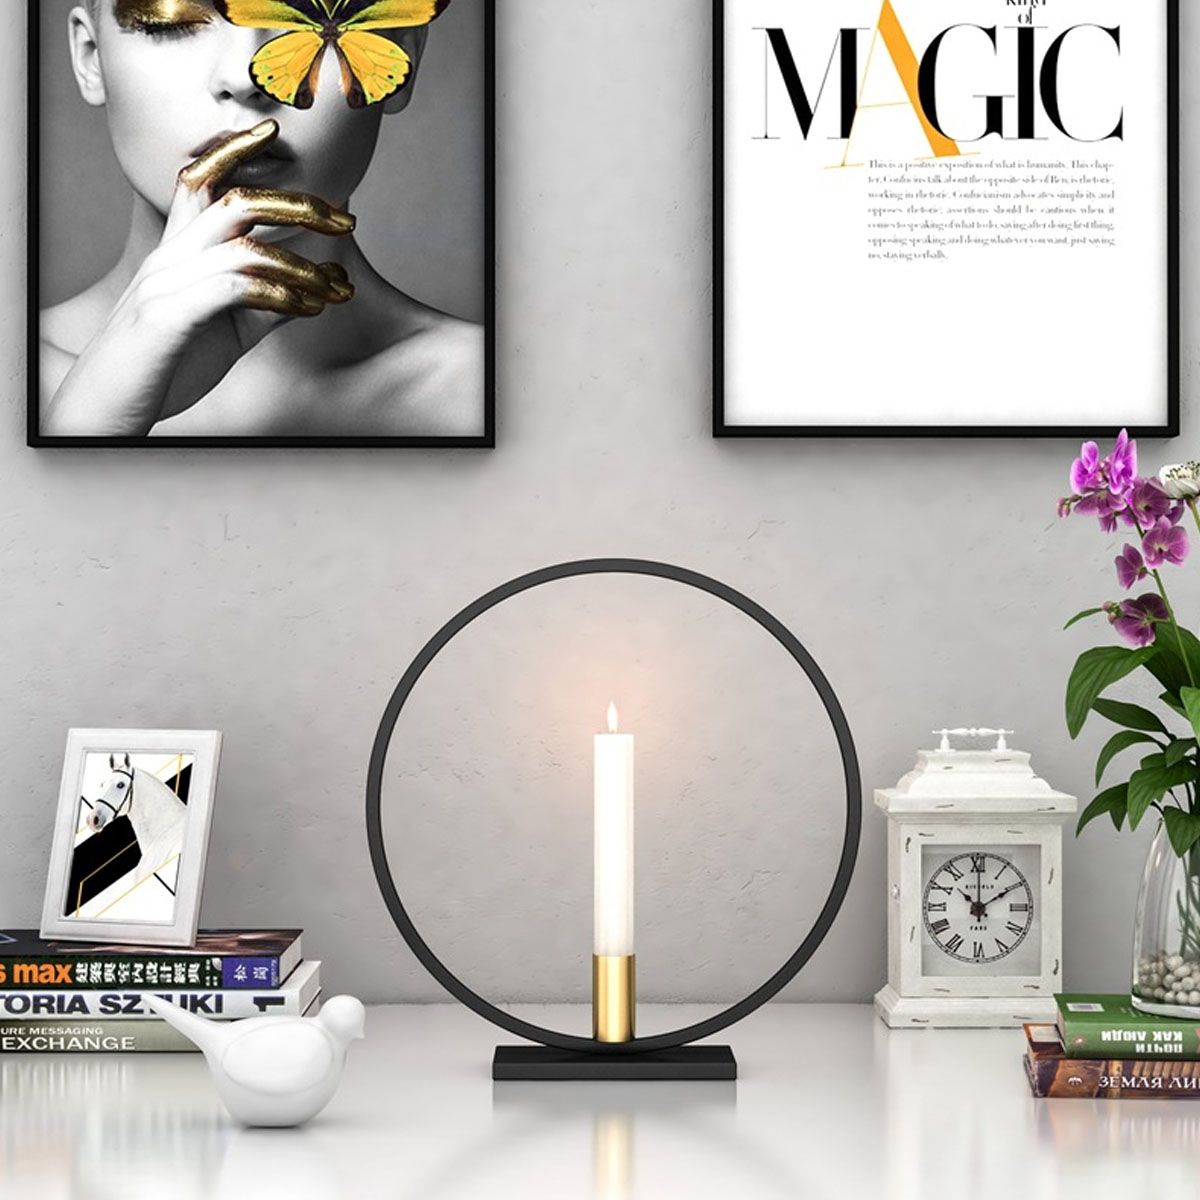 Nordic-Style-Geometric-Candlestick-Metal-Wall-Candle-Holder-Home-Wall-Decor-1476997